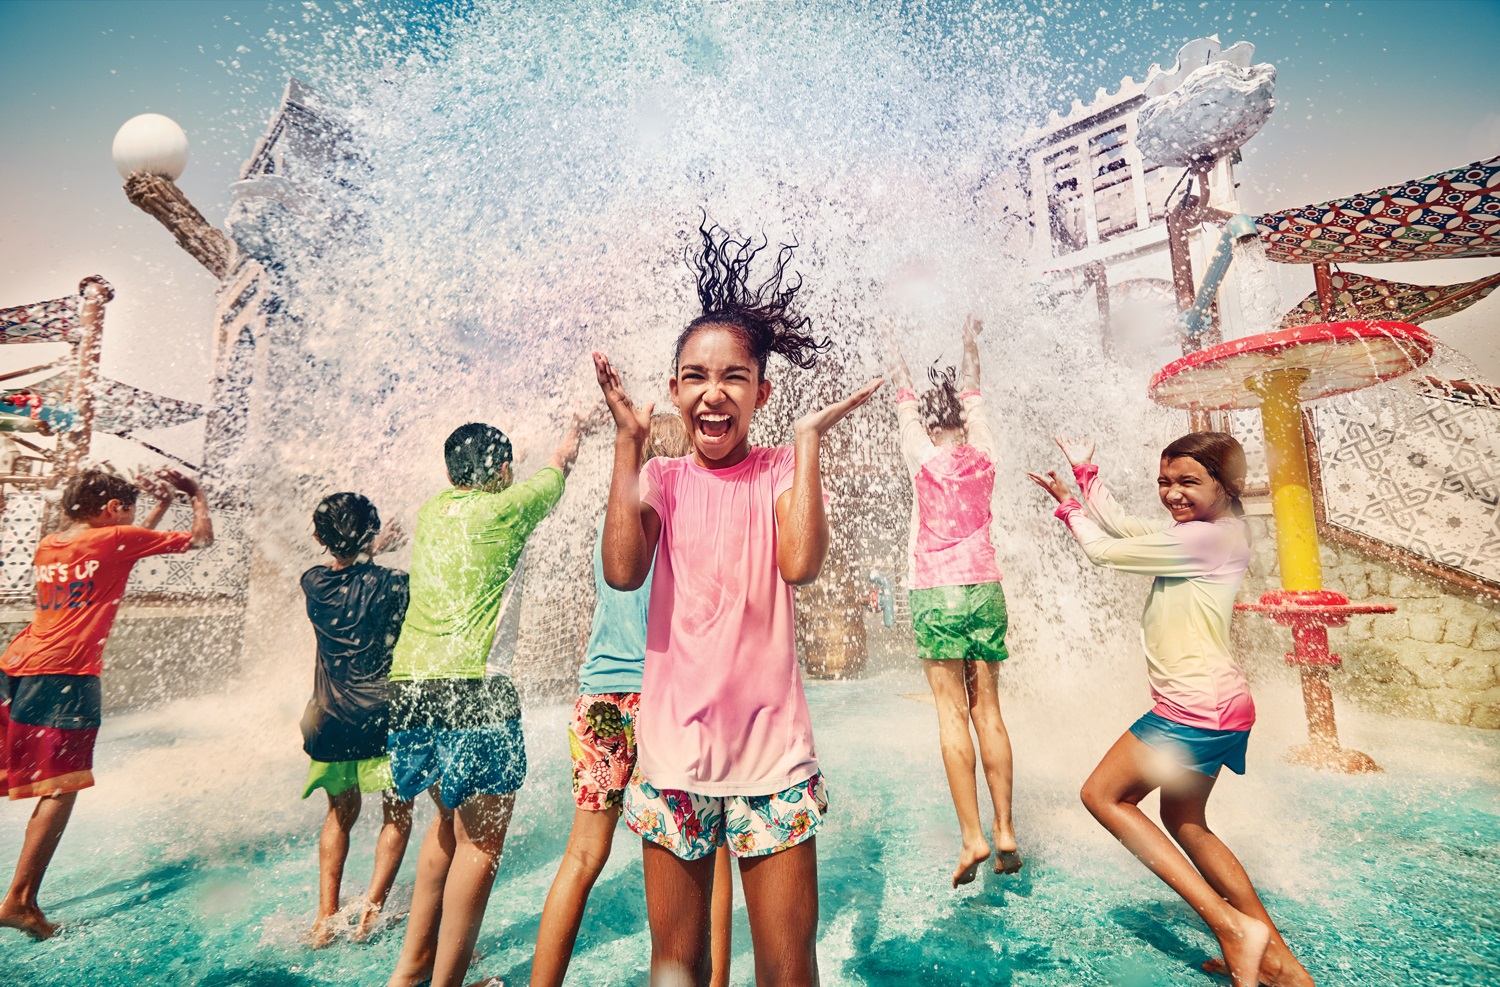 Cool Down This Spring Break With Yas Waterworld’s Exciting Rides, Slides And Attractions